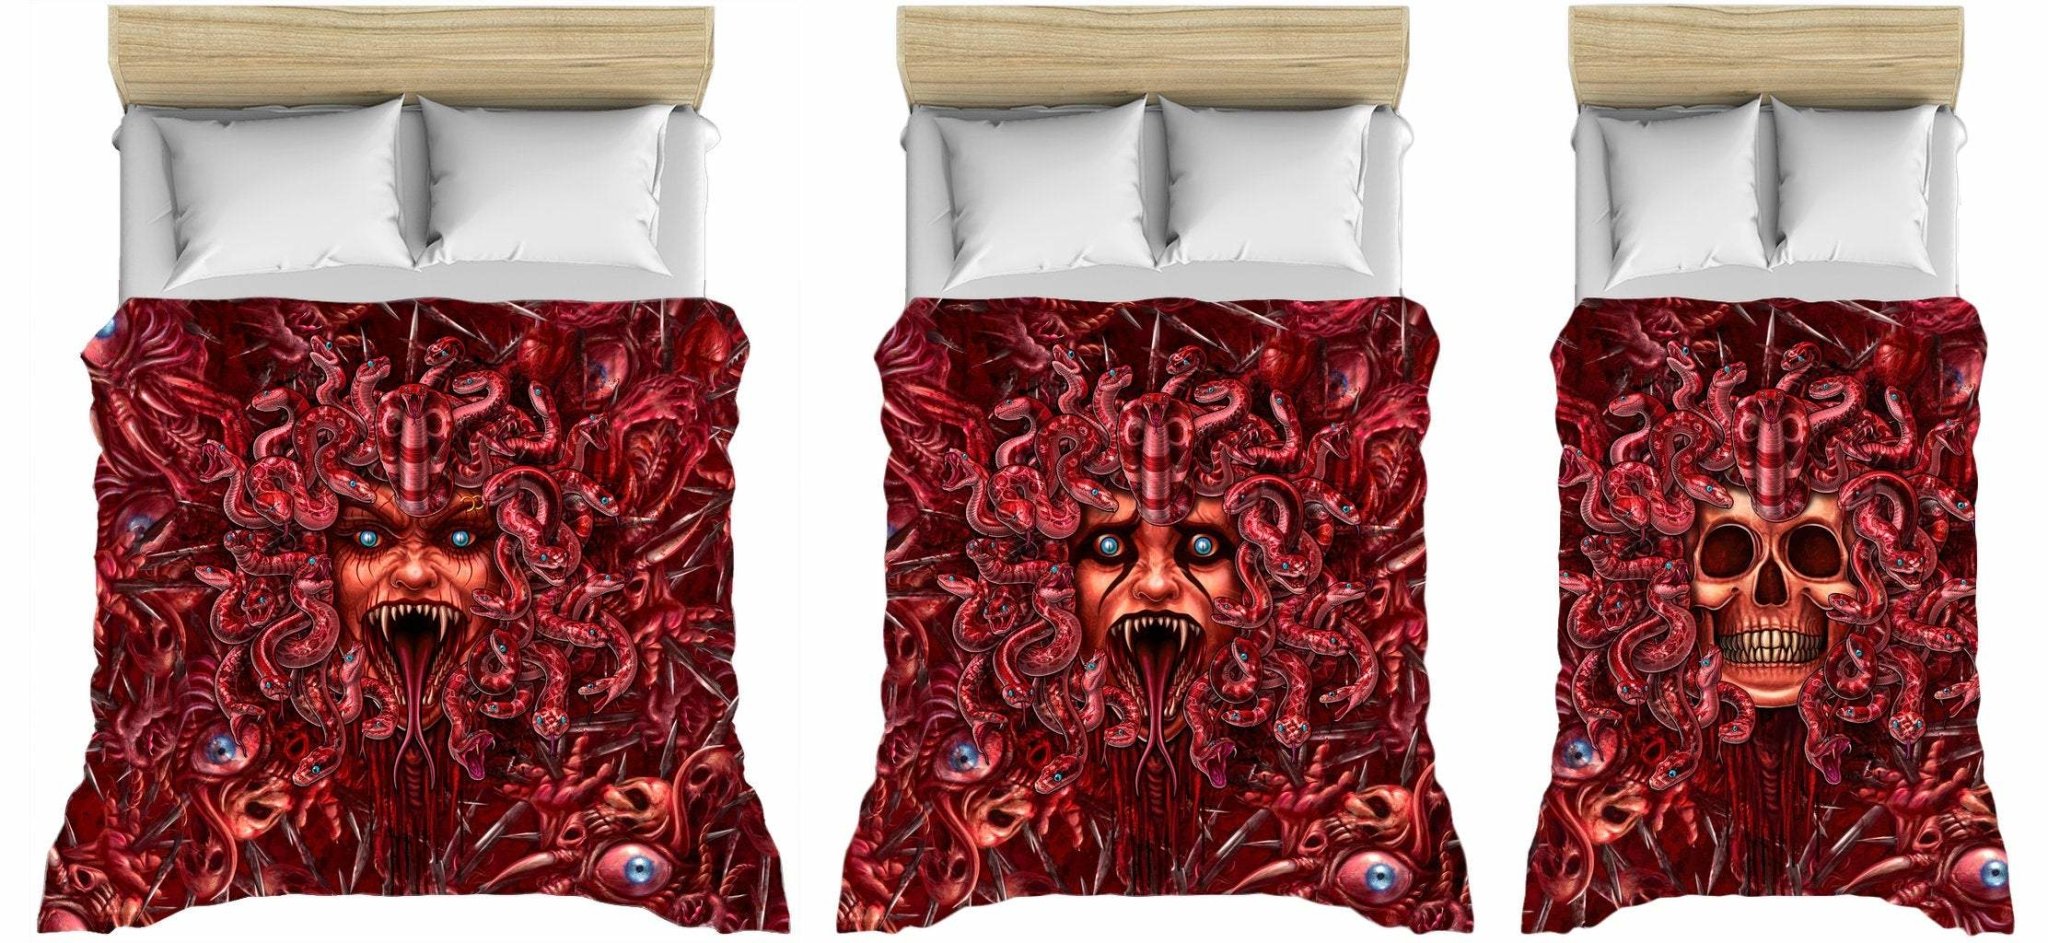 Horror Bedding Set, Comforter and Duvet, Medusa Skull, Halloween Bed Cover and Bedroom Decor, King, Queen and Twin Size - 3 Faces - Abysm Internal